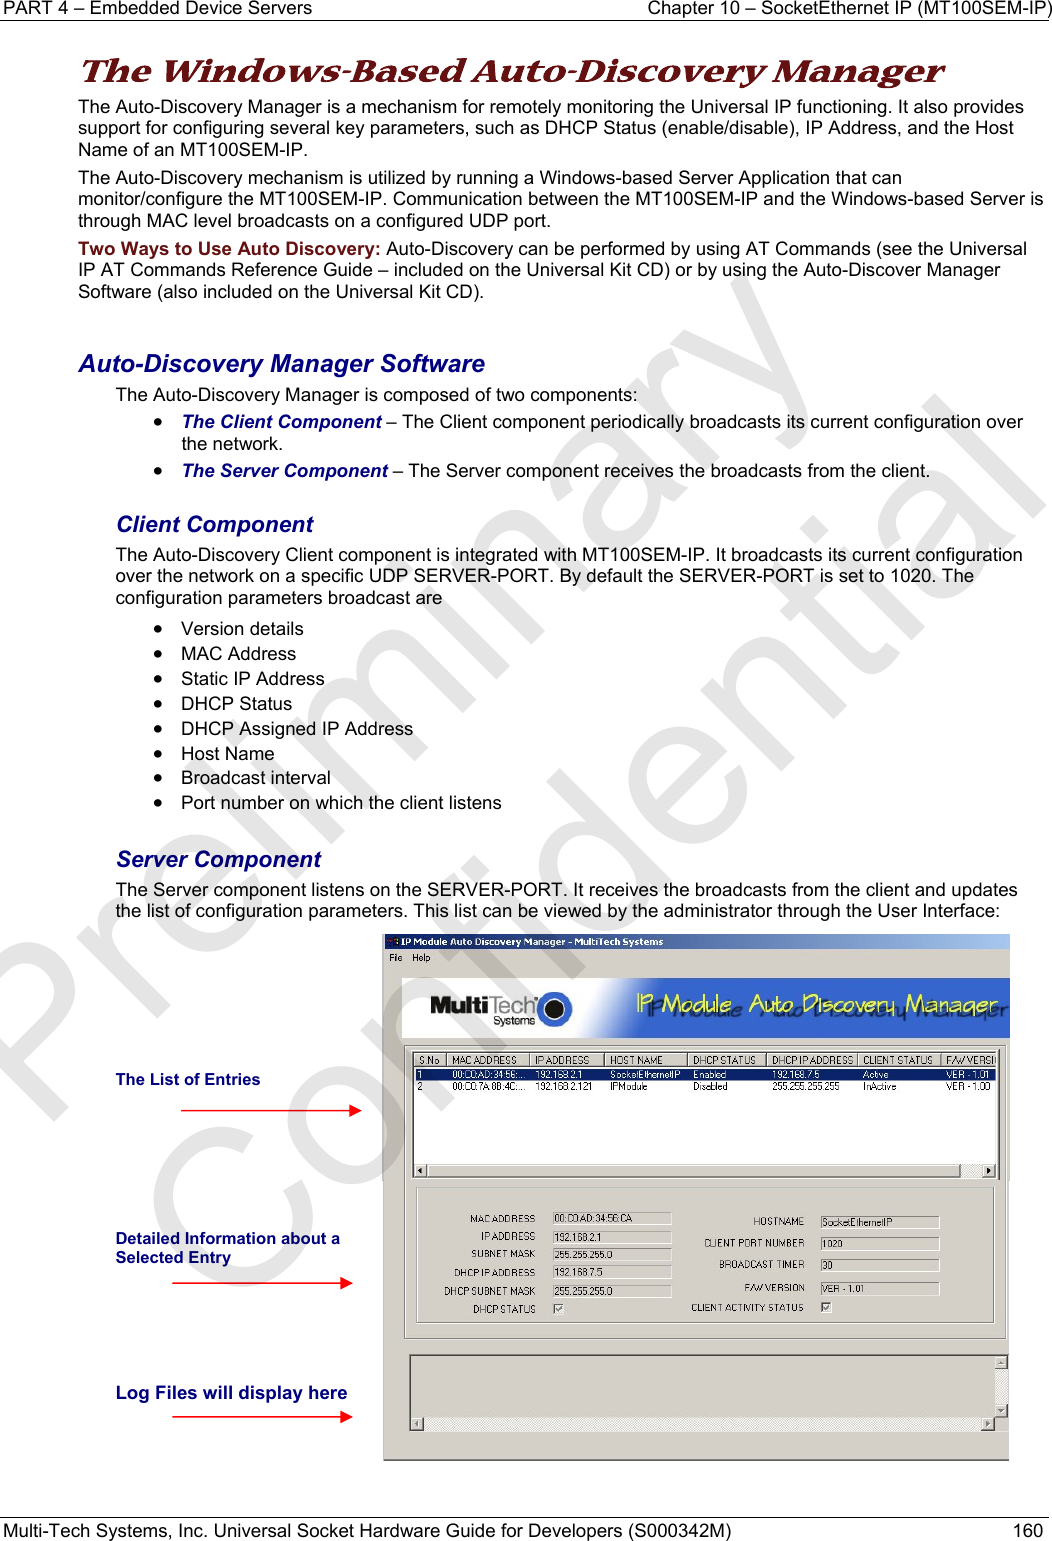 PART 4 – Embedded Device Servers  Chapter 10 – SocketEthernet IP (MT100SEM-IP)  Multi-Tech Systems, Inc. Universal Socket Hardware Guide for Developers (S000342M)  160  The Windows-Based Auto-Discovery Manager  The Auto-Discovery Manager is a mechanism for remotely monitoring the Universal IP functioning. It also provides support for configuring several key parameters, such as DHCP Status (enable/disable), IP Address, and the Host Name of an MT100SEM-IP.  The Auto-Discovery mechanism is utilized by running a Windows-based Server Application that can monitor/configure the MT100SEM-IP. Communication between the MT100SEM-IP and the Windows-based Server is through MAC level broadcasts on a configured UDP port. Two Ways to Use Auto Discovery: Auto-Discovery can be performed by using AT Commands (see the Universal IP AT Commands Reference Guide – included on the Universal Kit CD) or by using the Auto-Discover Manager Software (also included on the Universal Kit CD).  Auto-Discovery Manager Software The Auto-Discovery Manager is composed of two components: • The Client Component – The Client component periodically broadcasts its current configuration over the network. • The Server Component – The Server component receives the broadcasts from the client.  Client Component The Auto-Discovery Client component is integrated with MT100SEM-IP. It broadcasts its current configuration over the network on a specific UDP SERVER-PORT. By default the SERVER-PORT is set to 1020. The configuration parameters broadcast are  • Version details • MAC Address • Static IP Address • DHCP Status • DHCP Assigned IP Address • Host Name • Broadcast interval • Port number on which the client listens  Server Component The Server component listens on the SERVER-PORT. It receives the broadcasts from the client and updates the list of configuration parameters. This list can be viewed by the administrator through the User Interface:      The List of Entries     Detailed Information about a Selected Entry    Log Files will display here    Preliminary  Confidential